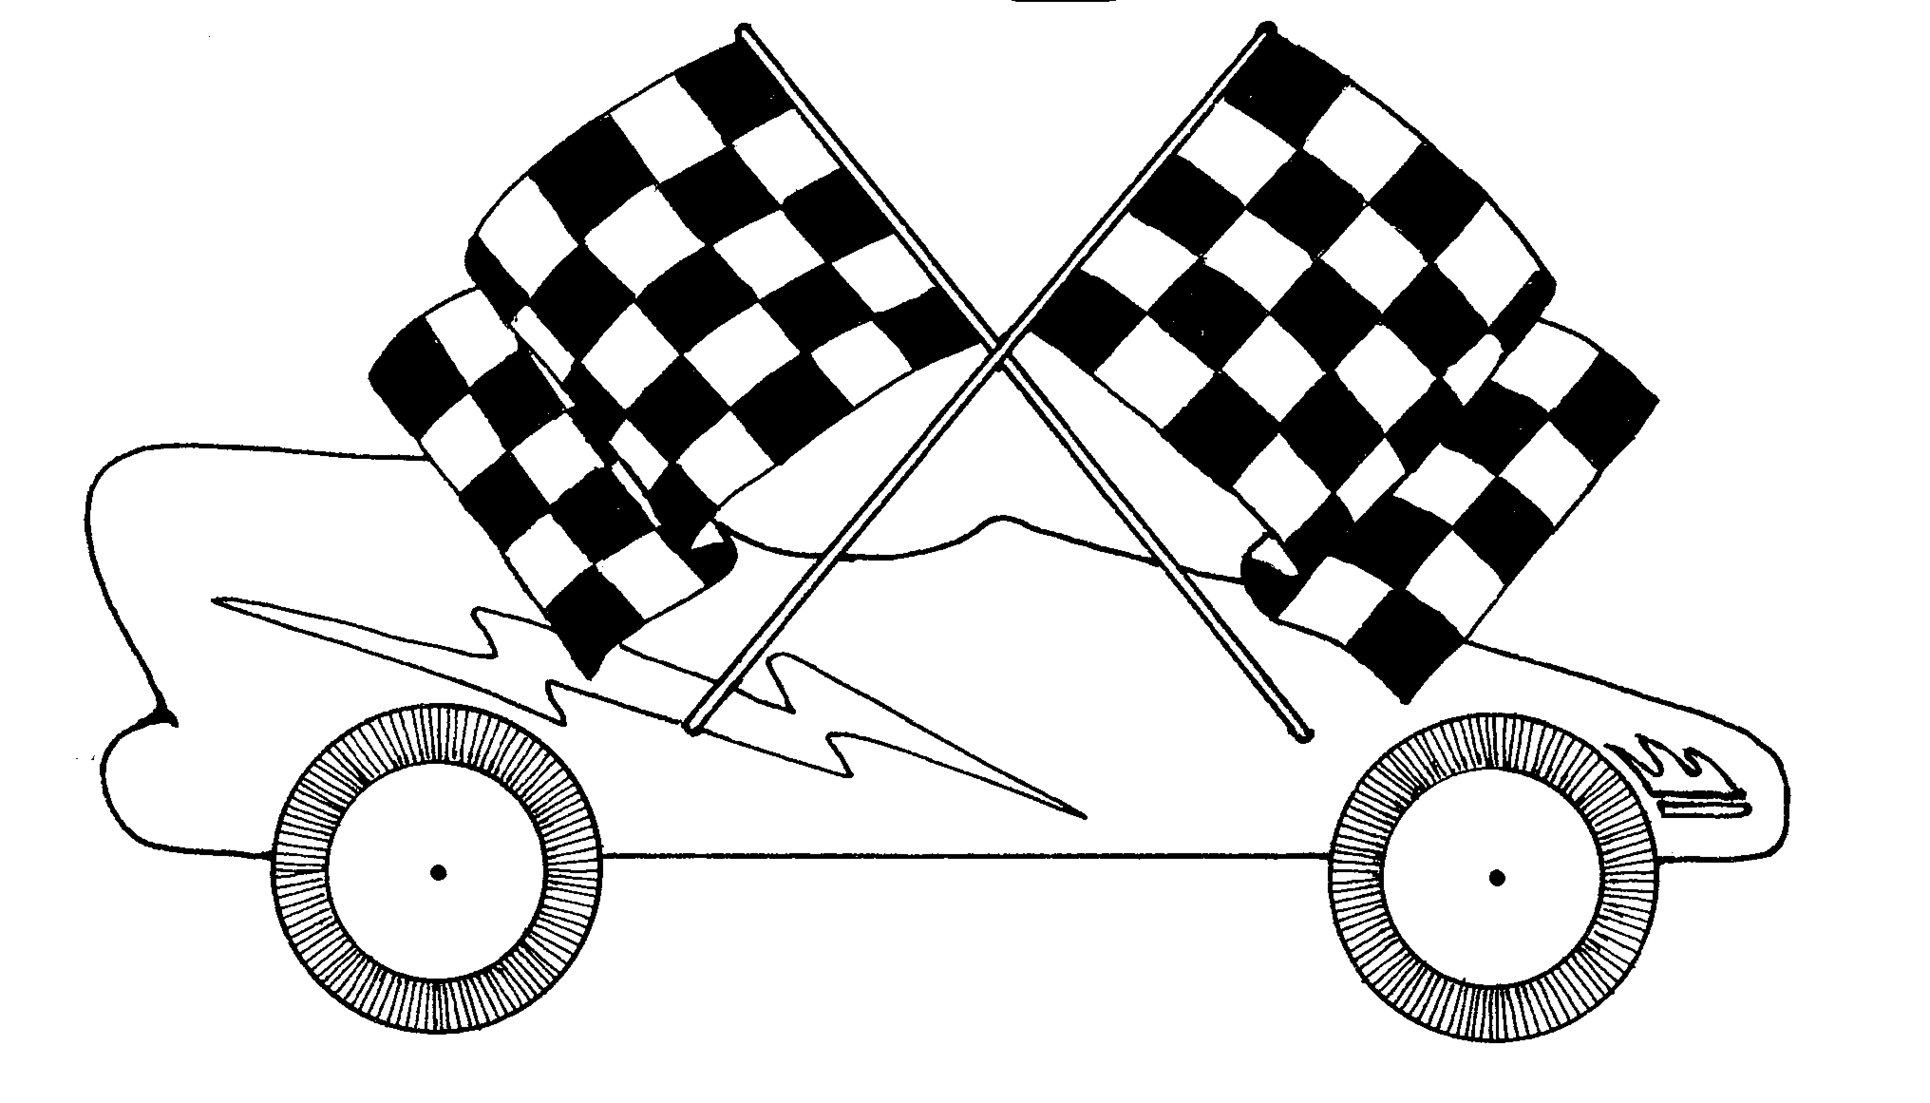 Pinewood Derby Clipart